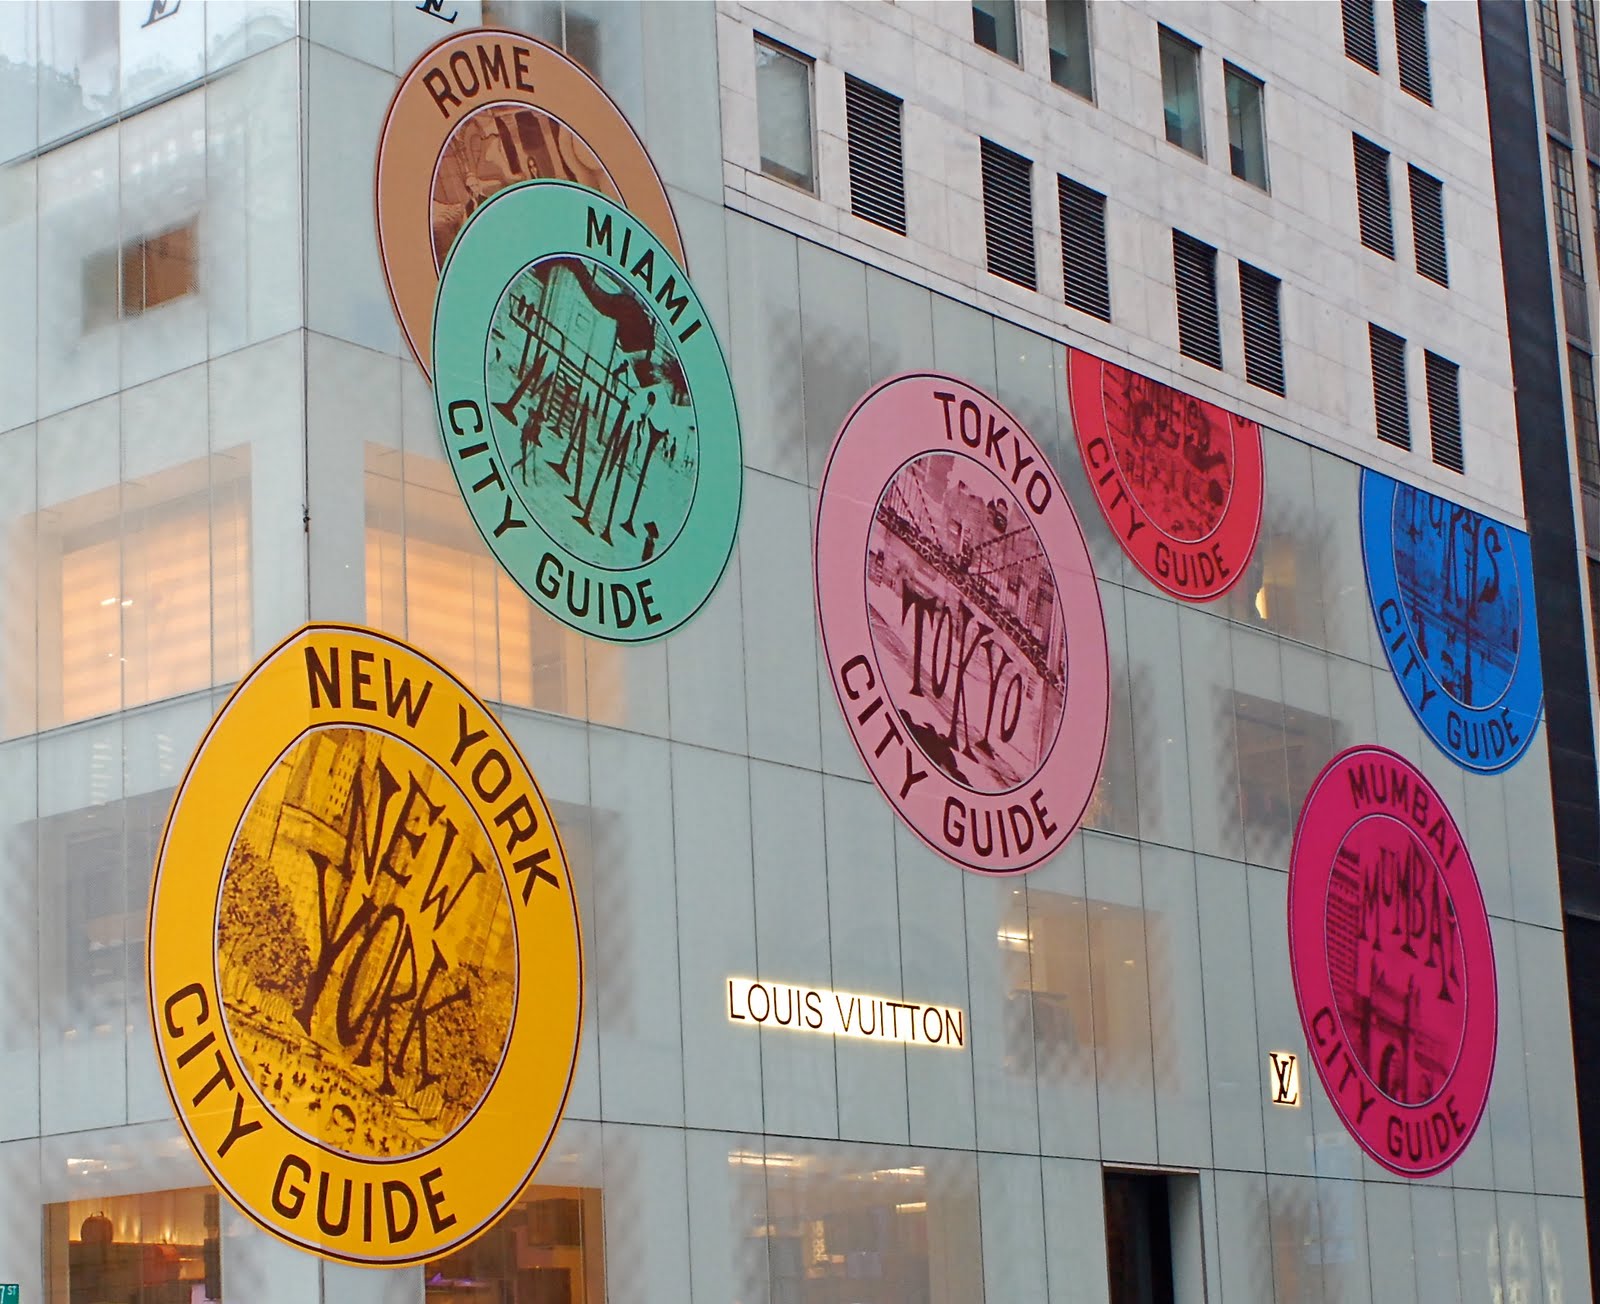 NYC ♥ NYC: Louis Vuitton Flagship Store on Fifth Avenue - November CITY GUIDE motif